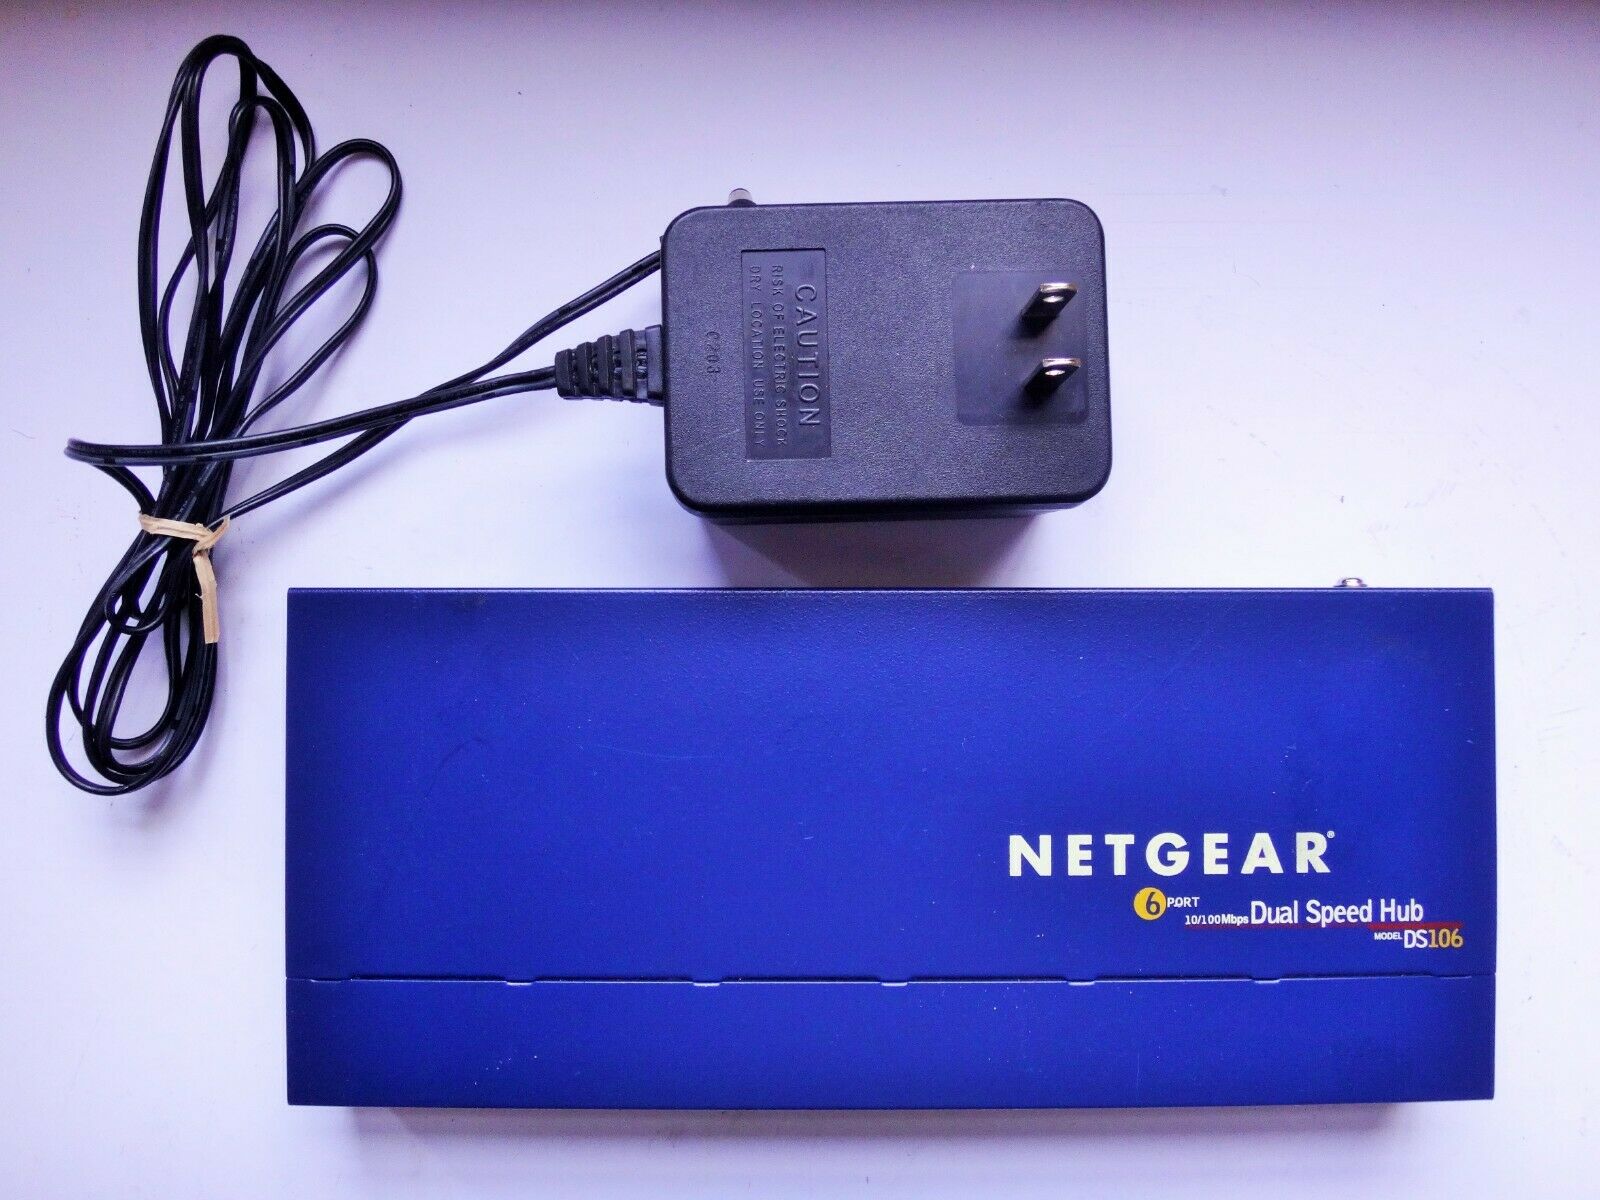 NETGEAR 6-Port 10/100 Dual Speed Hub DS106 WITH AC Power Adapter TESTED & WORKNG